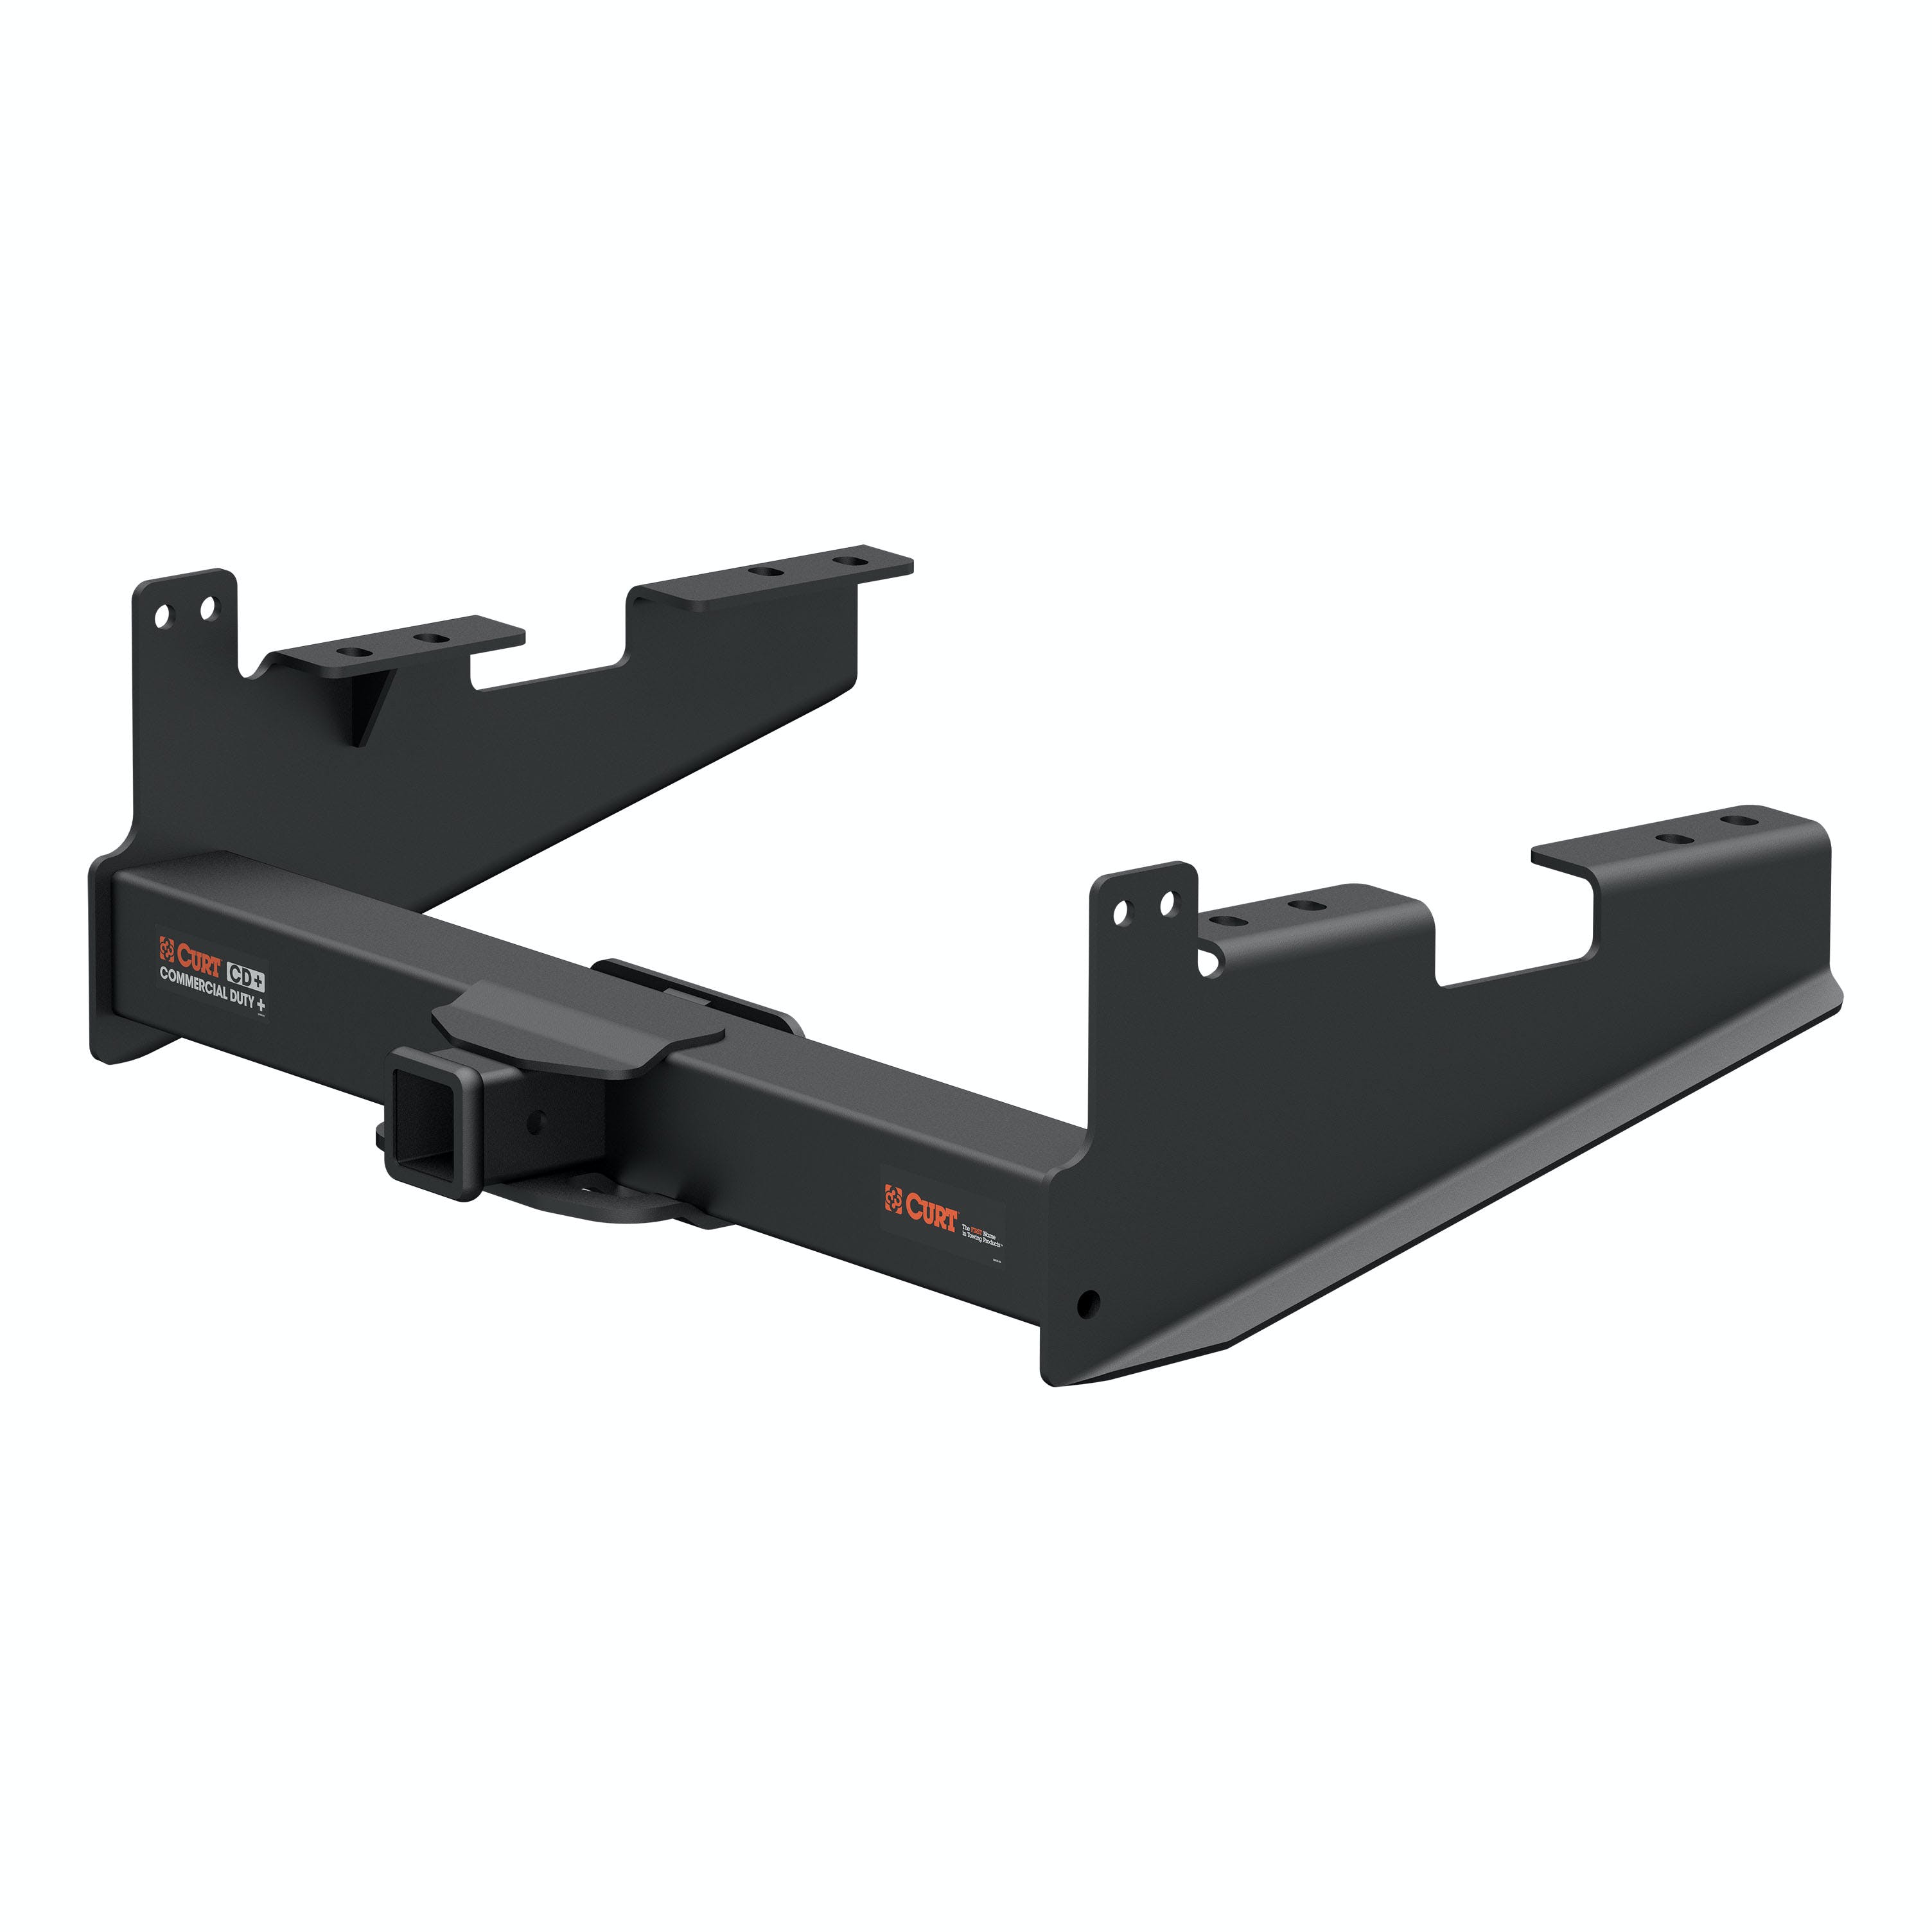 CURT 15802 Commercial Duty Class 5 Hitch, 2-1/2, Select Ford F250, F350, F450 Super Duty